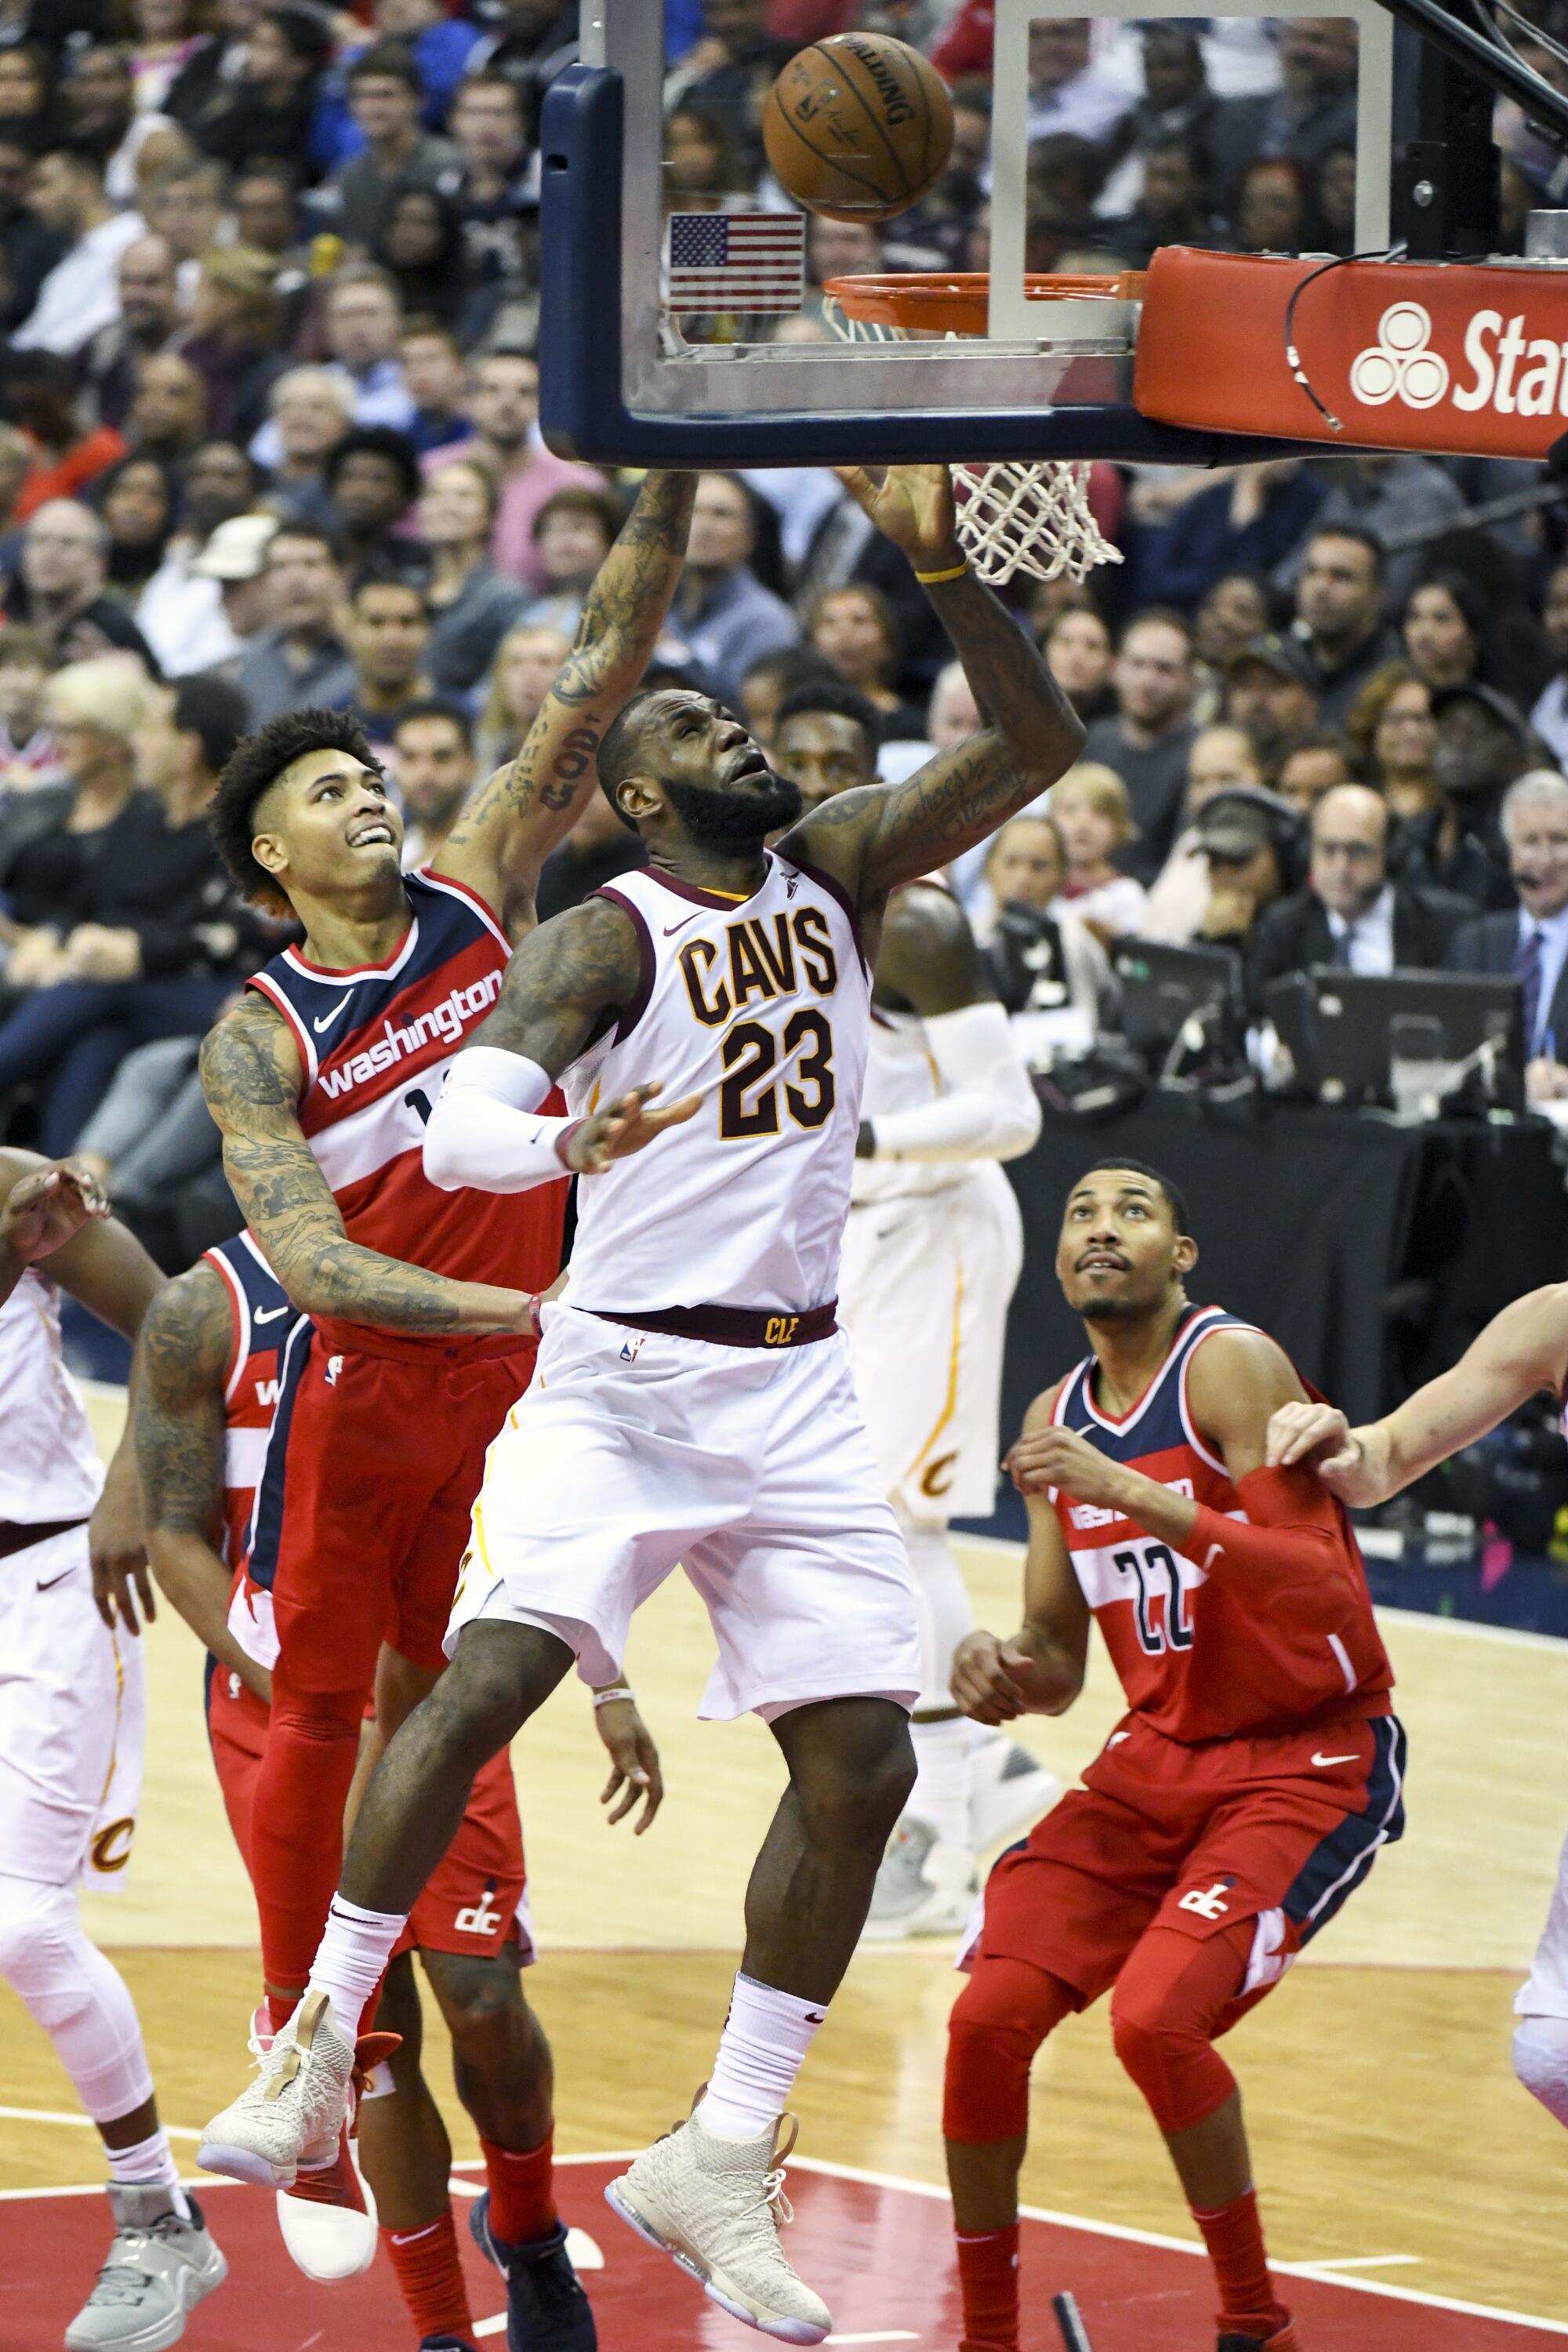 LeBron James scores and is fouled by Wizards forward Kelly Oubre Jr. on a layup.